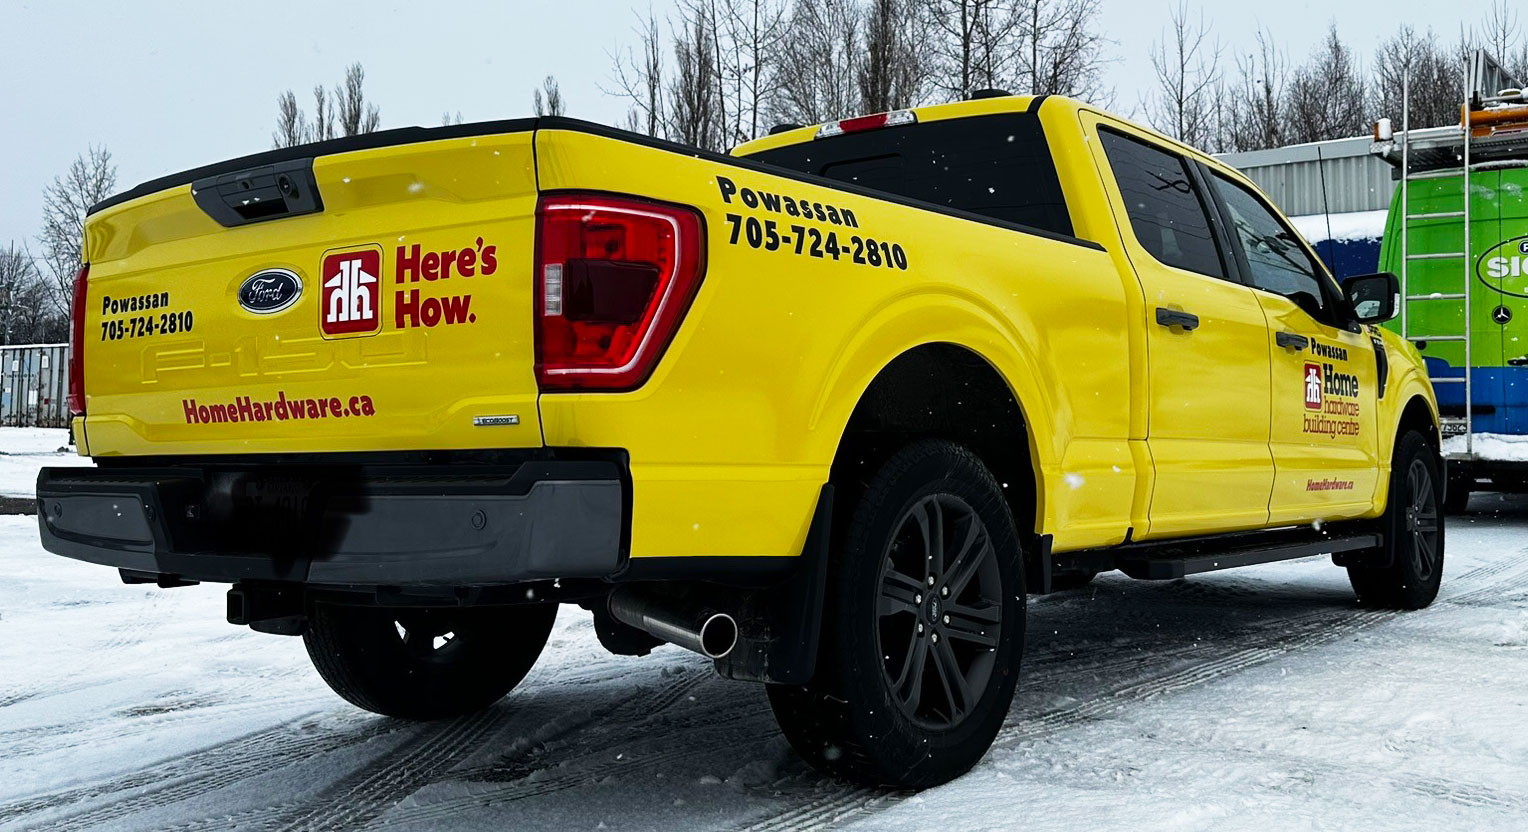 Home Hardware Powassan - Truck Wrap and Decals